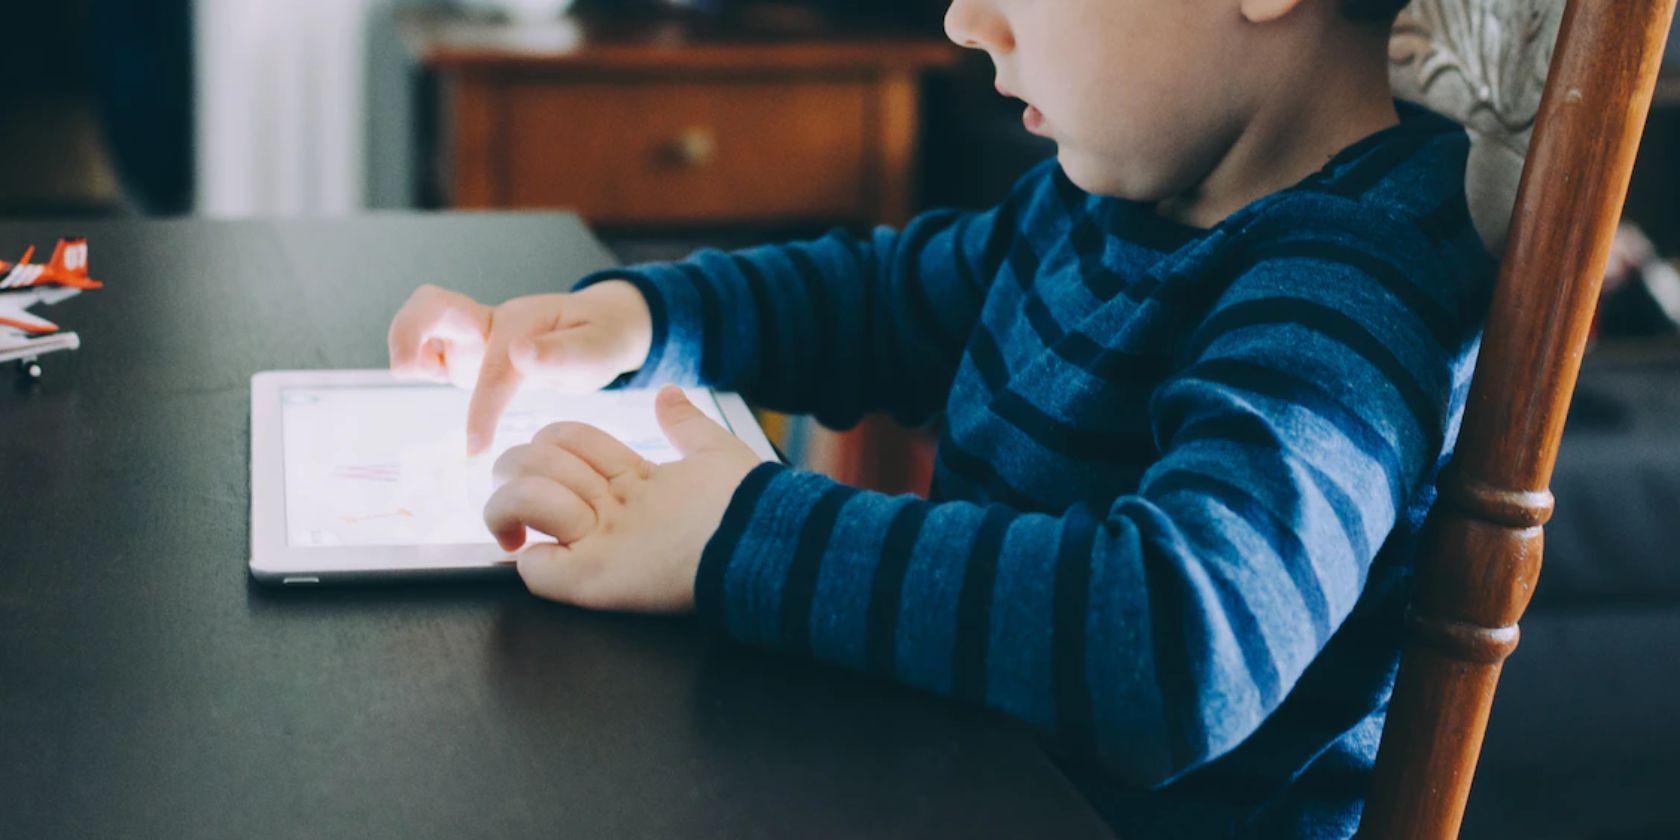 kid playing games on a tablet with touch inputs